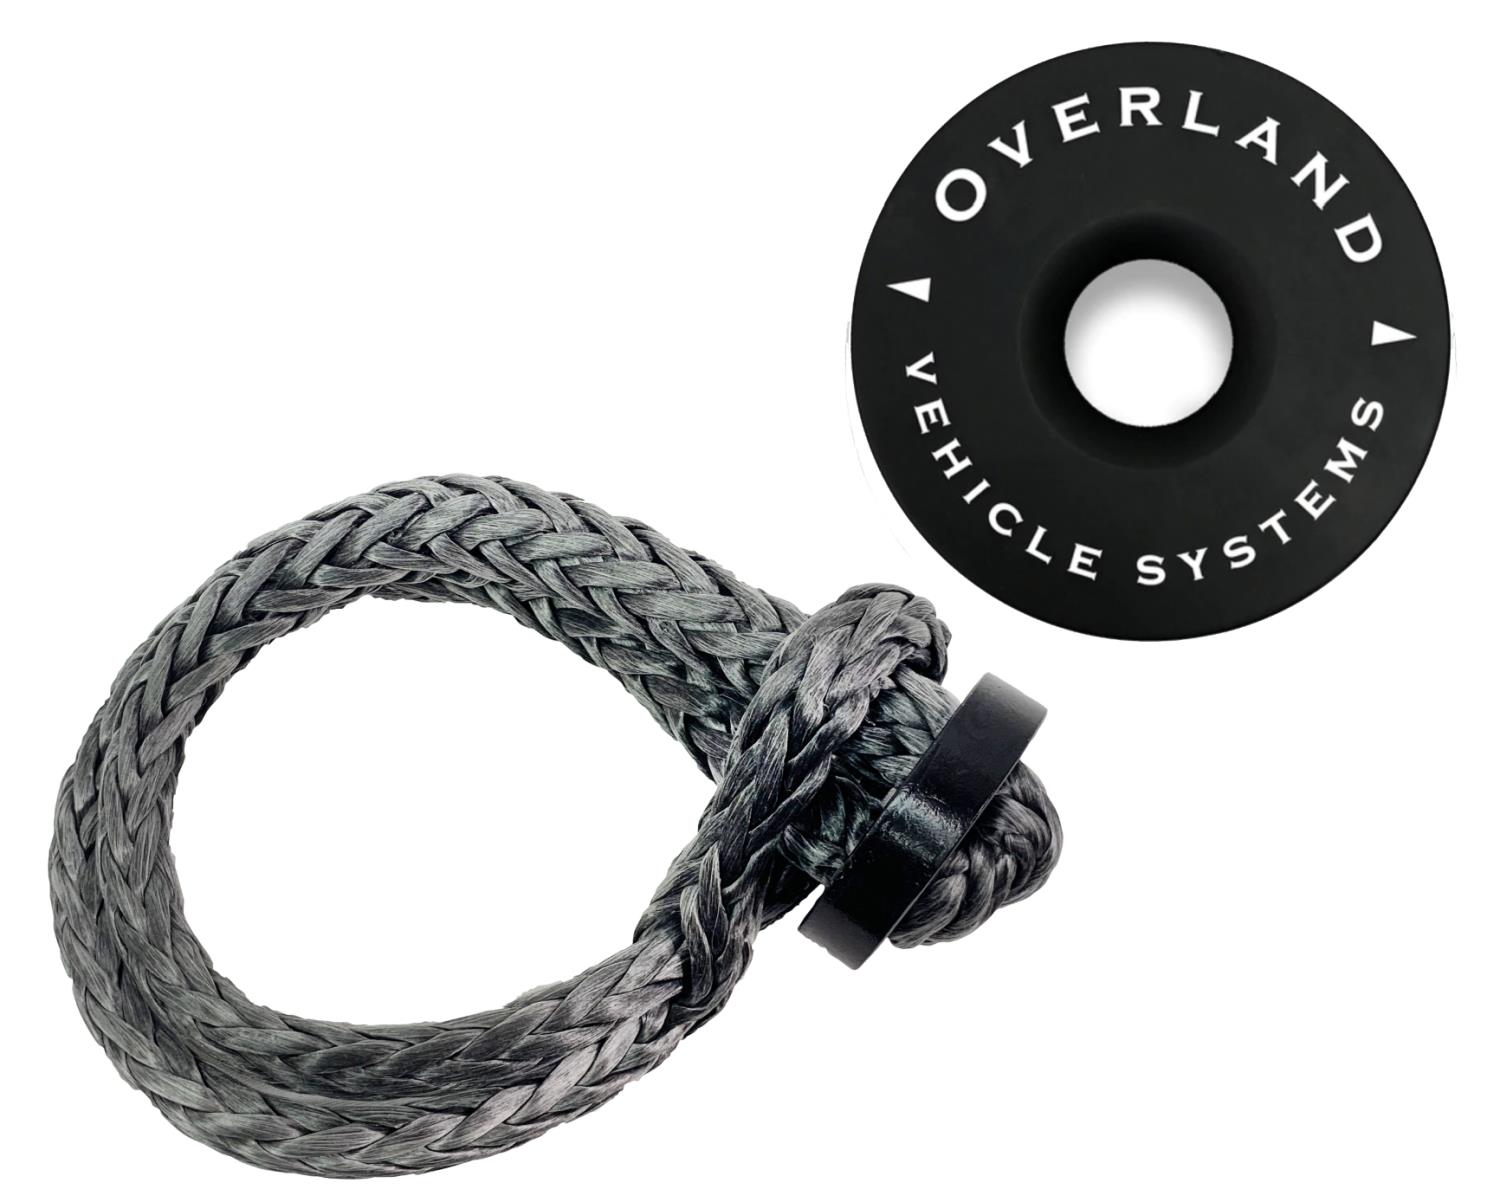 5/8 in. Soft Shackle with Collar and 6 1/4 in. Recovery Ring Combo, Universal